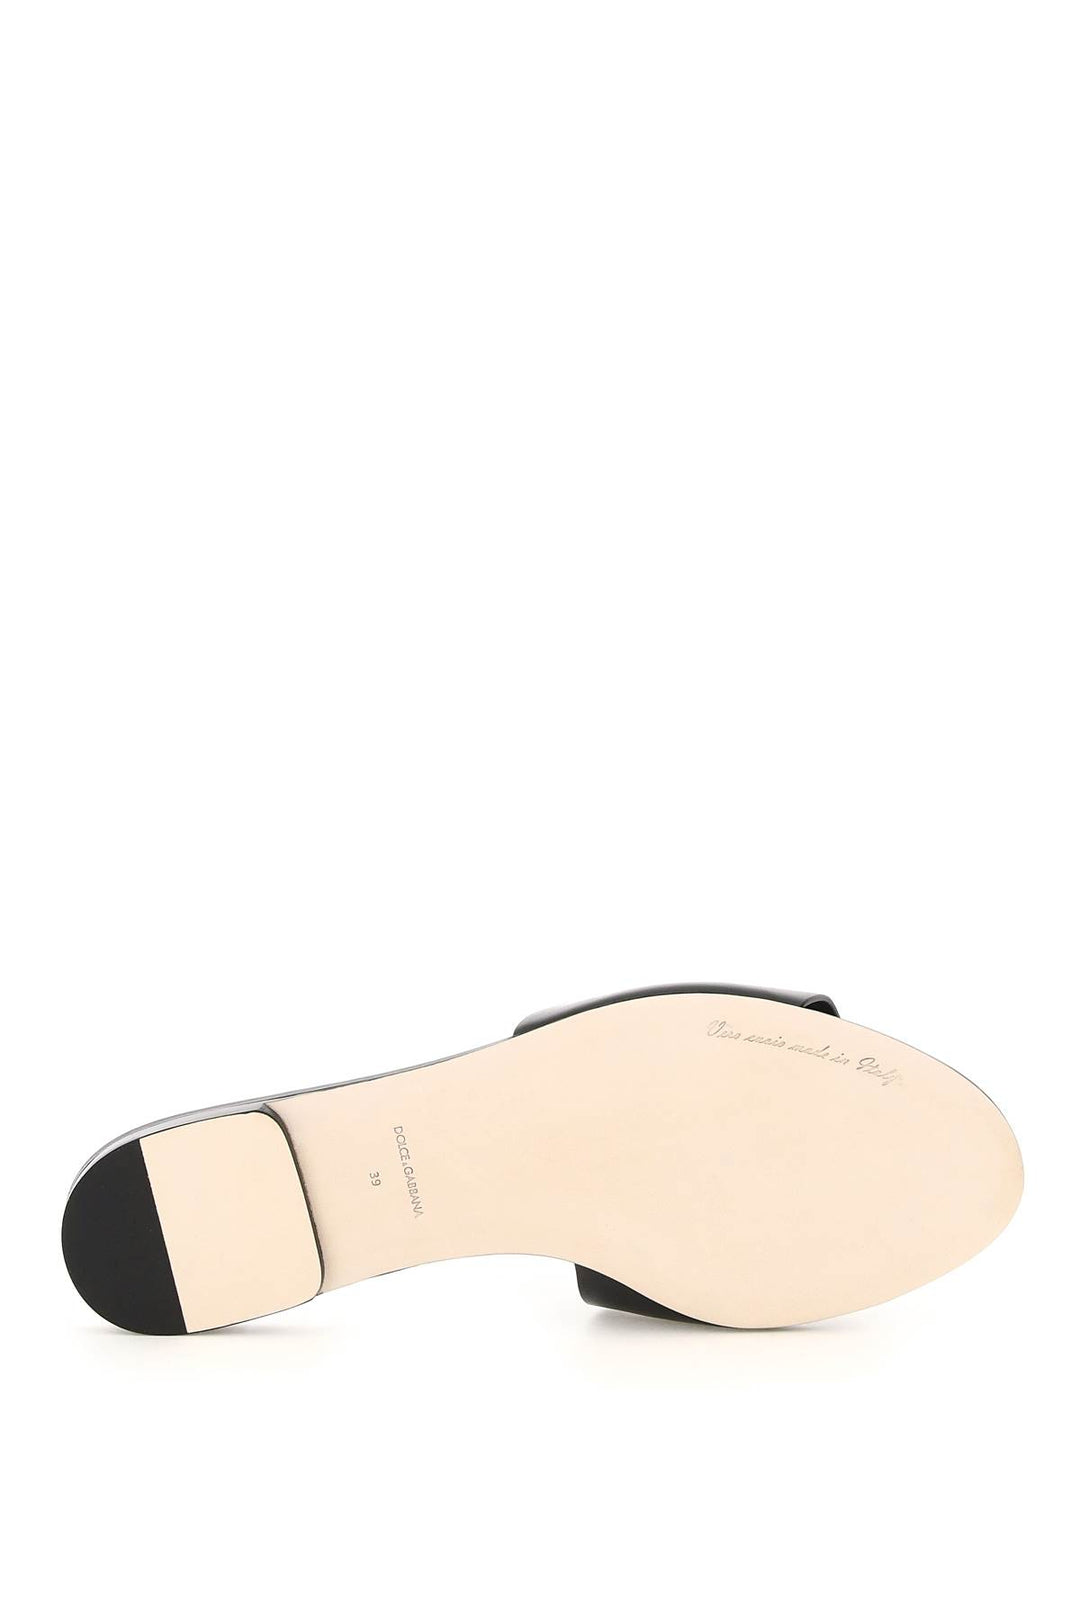 Slides In Pelle Con Logo Cut Out - Dolce & Gabbana - Donna